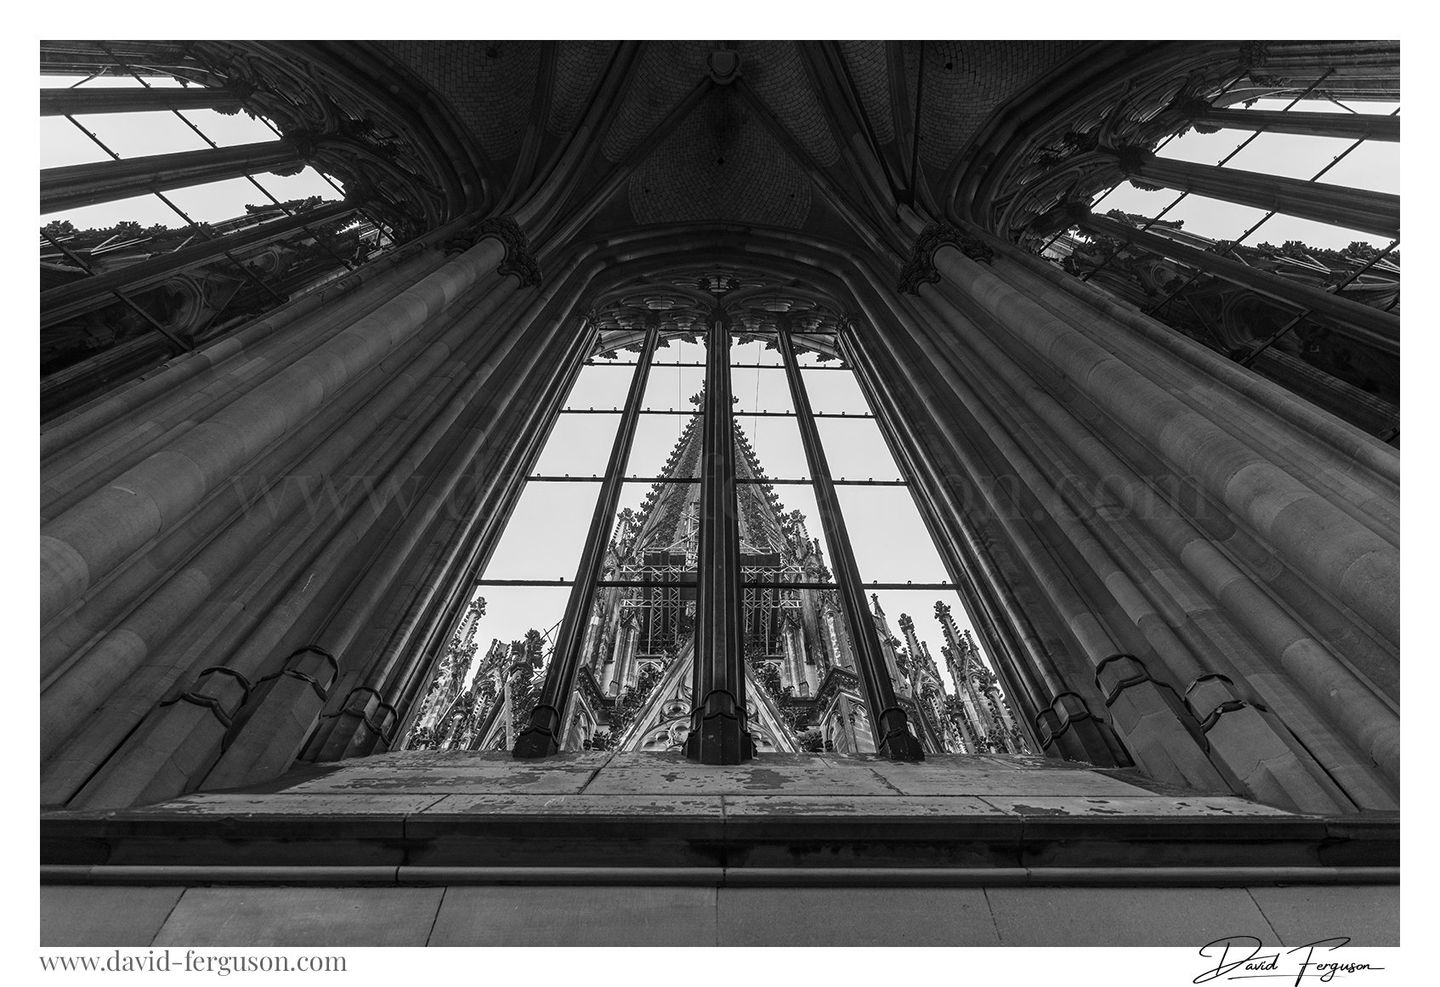 Cologne Cathedral Photo Gallery by David Ferguson